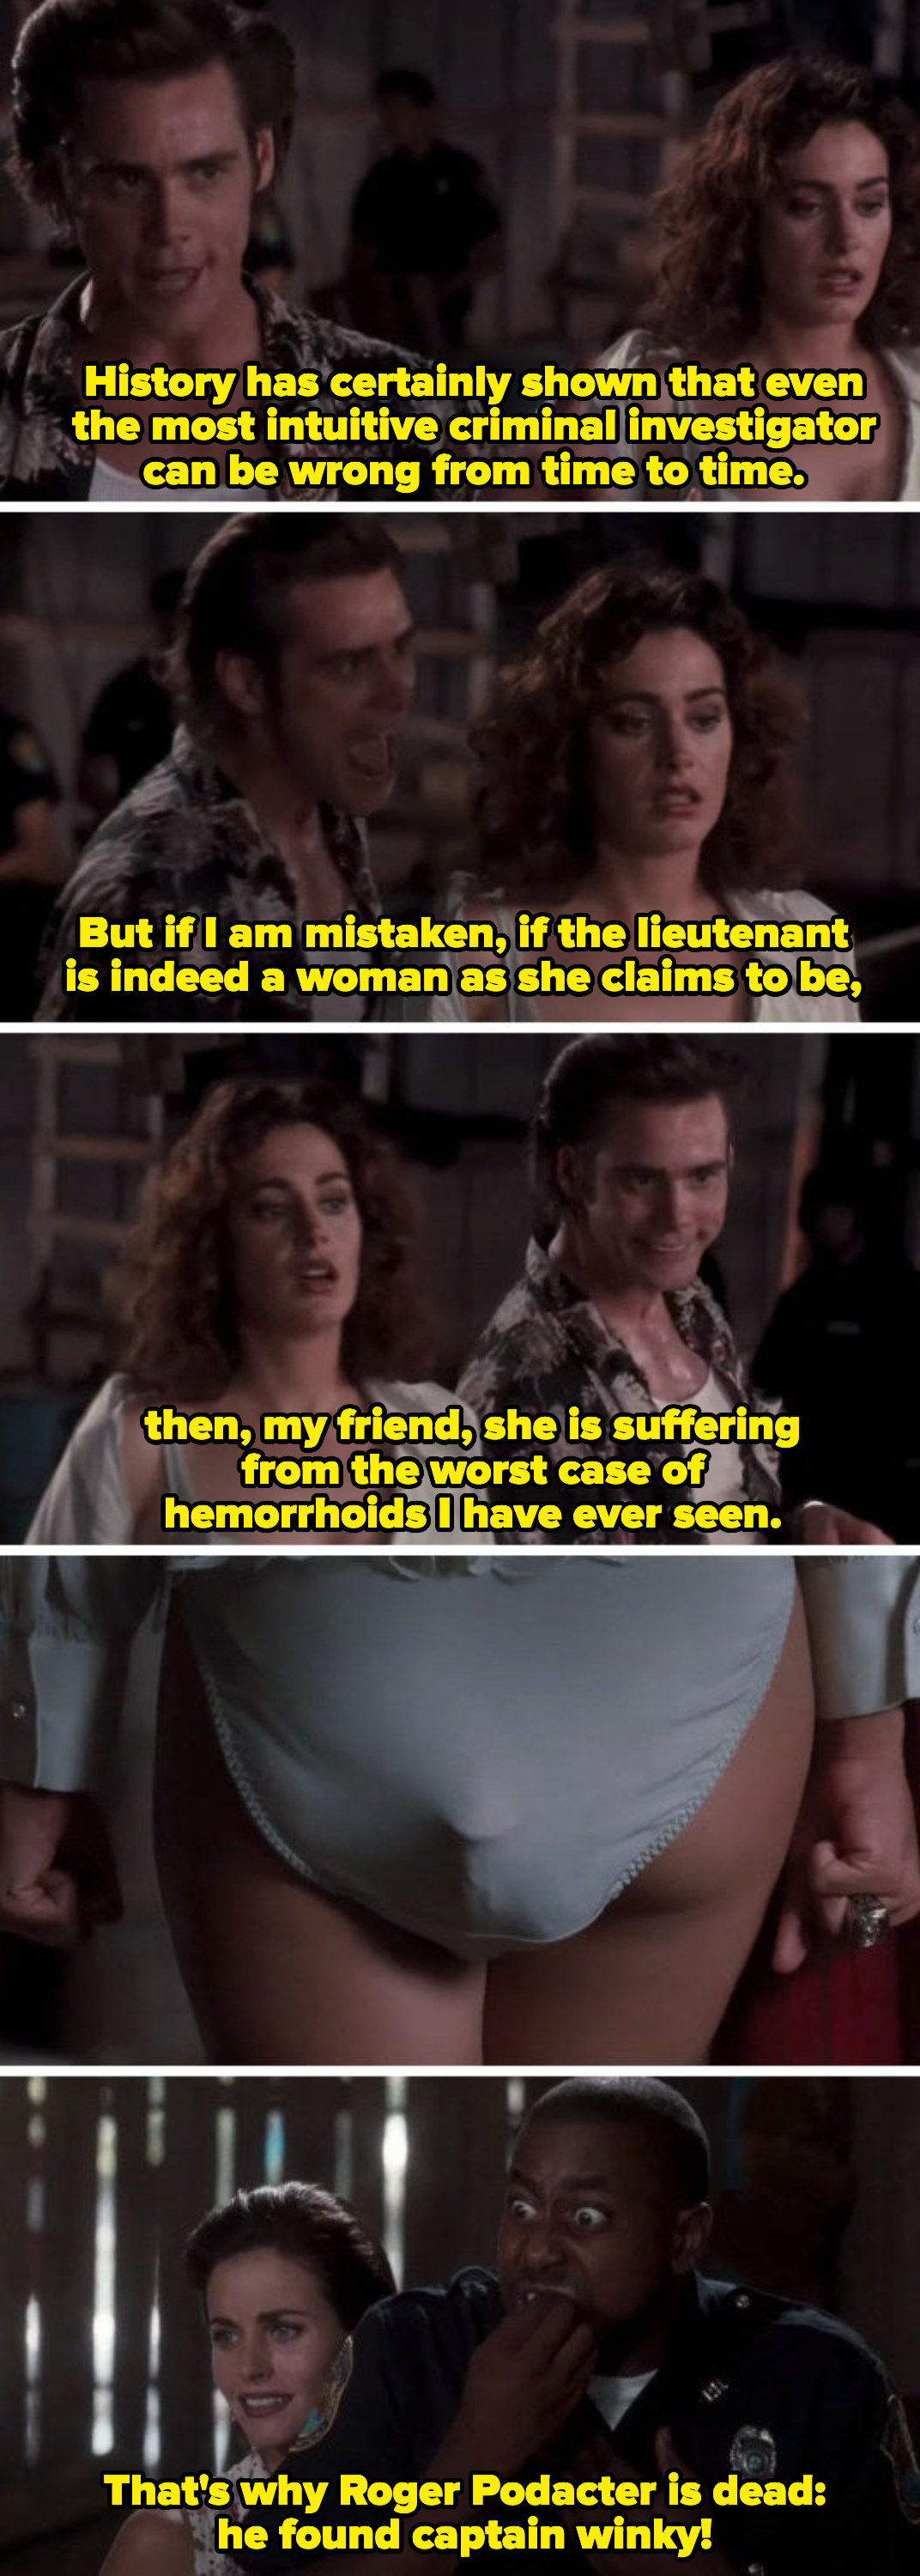 Ace Ventura outing Lt Einhorn as transgender in an insensitive way, saying: &quot;But if I am mistaken, if the lieutenant is indeed a woman as she claims to be, then she&#x27;s suffering from the worst case of hemorrhoids I have ever seen&quot;